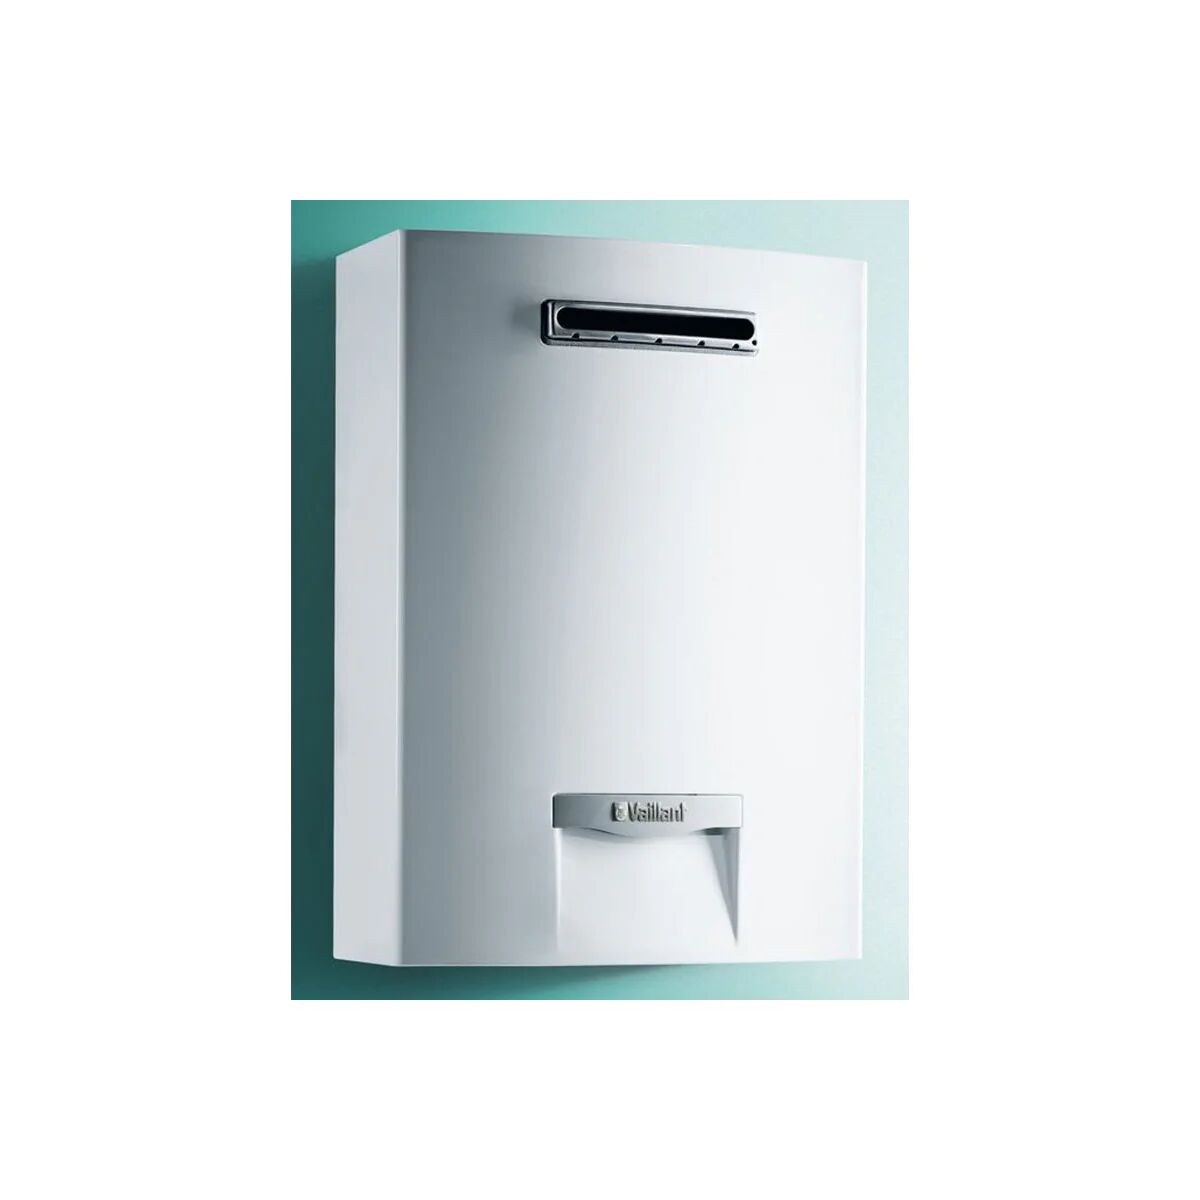 Scaldabagno Vaillant Outsidemag 128/1-5 Camera Stagna 12 Lt Low Nox Gpl A (10022466)